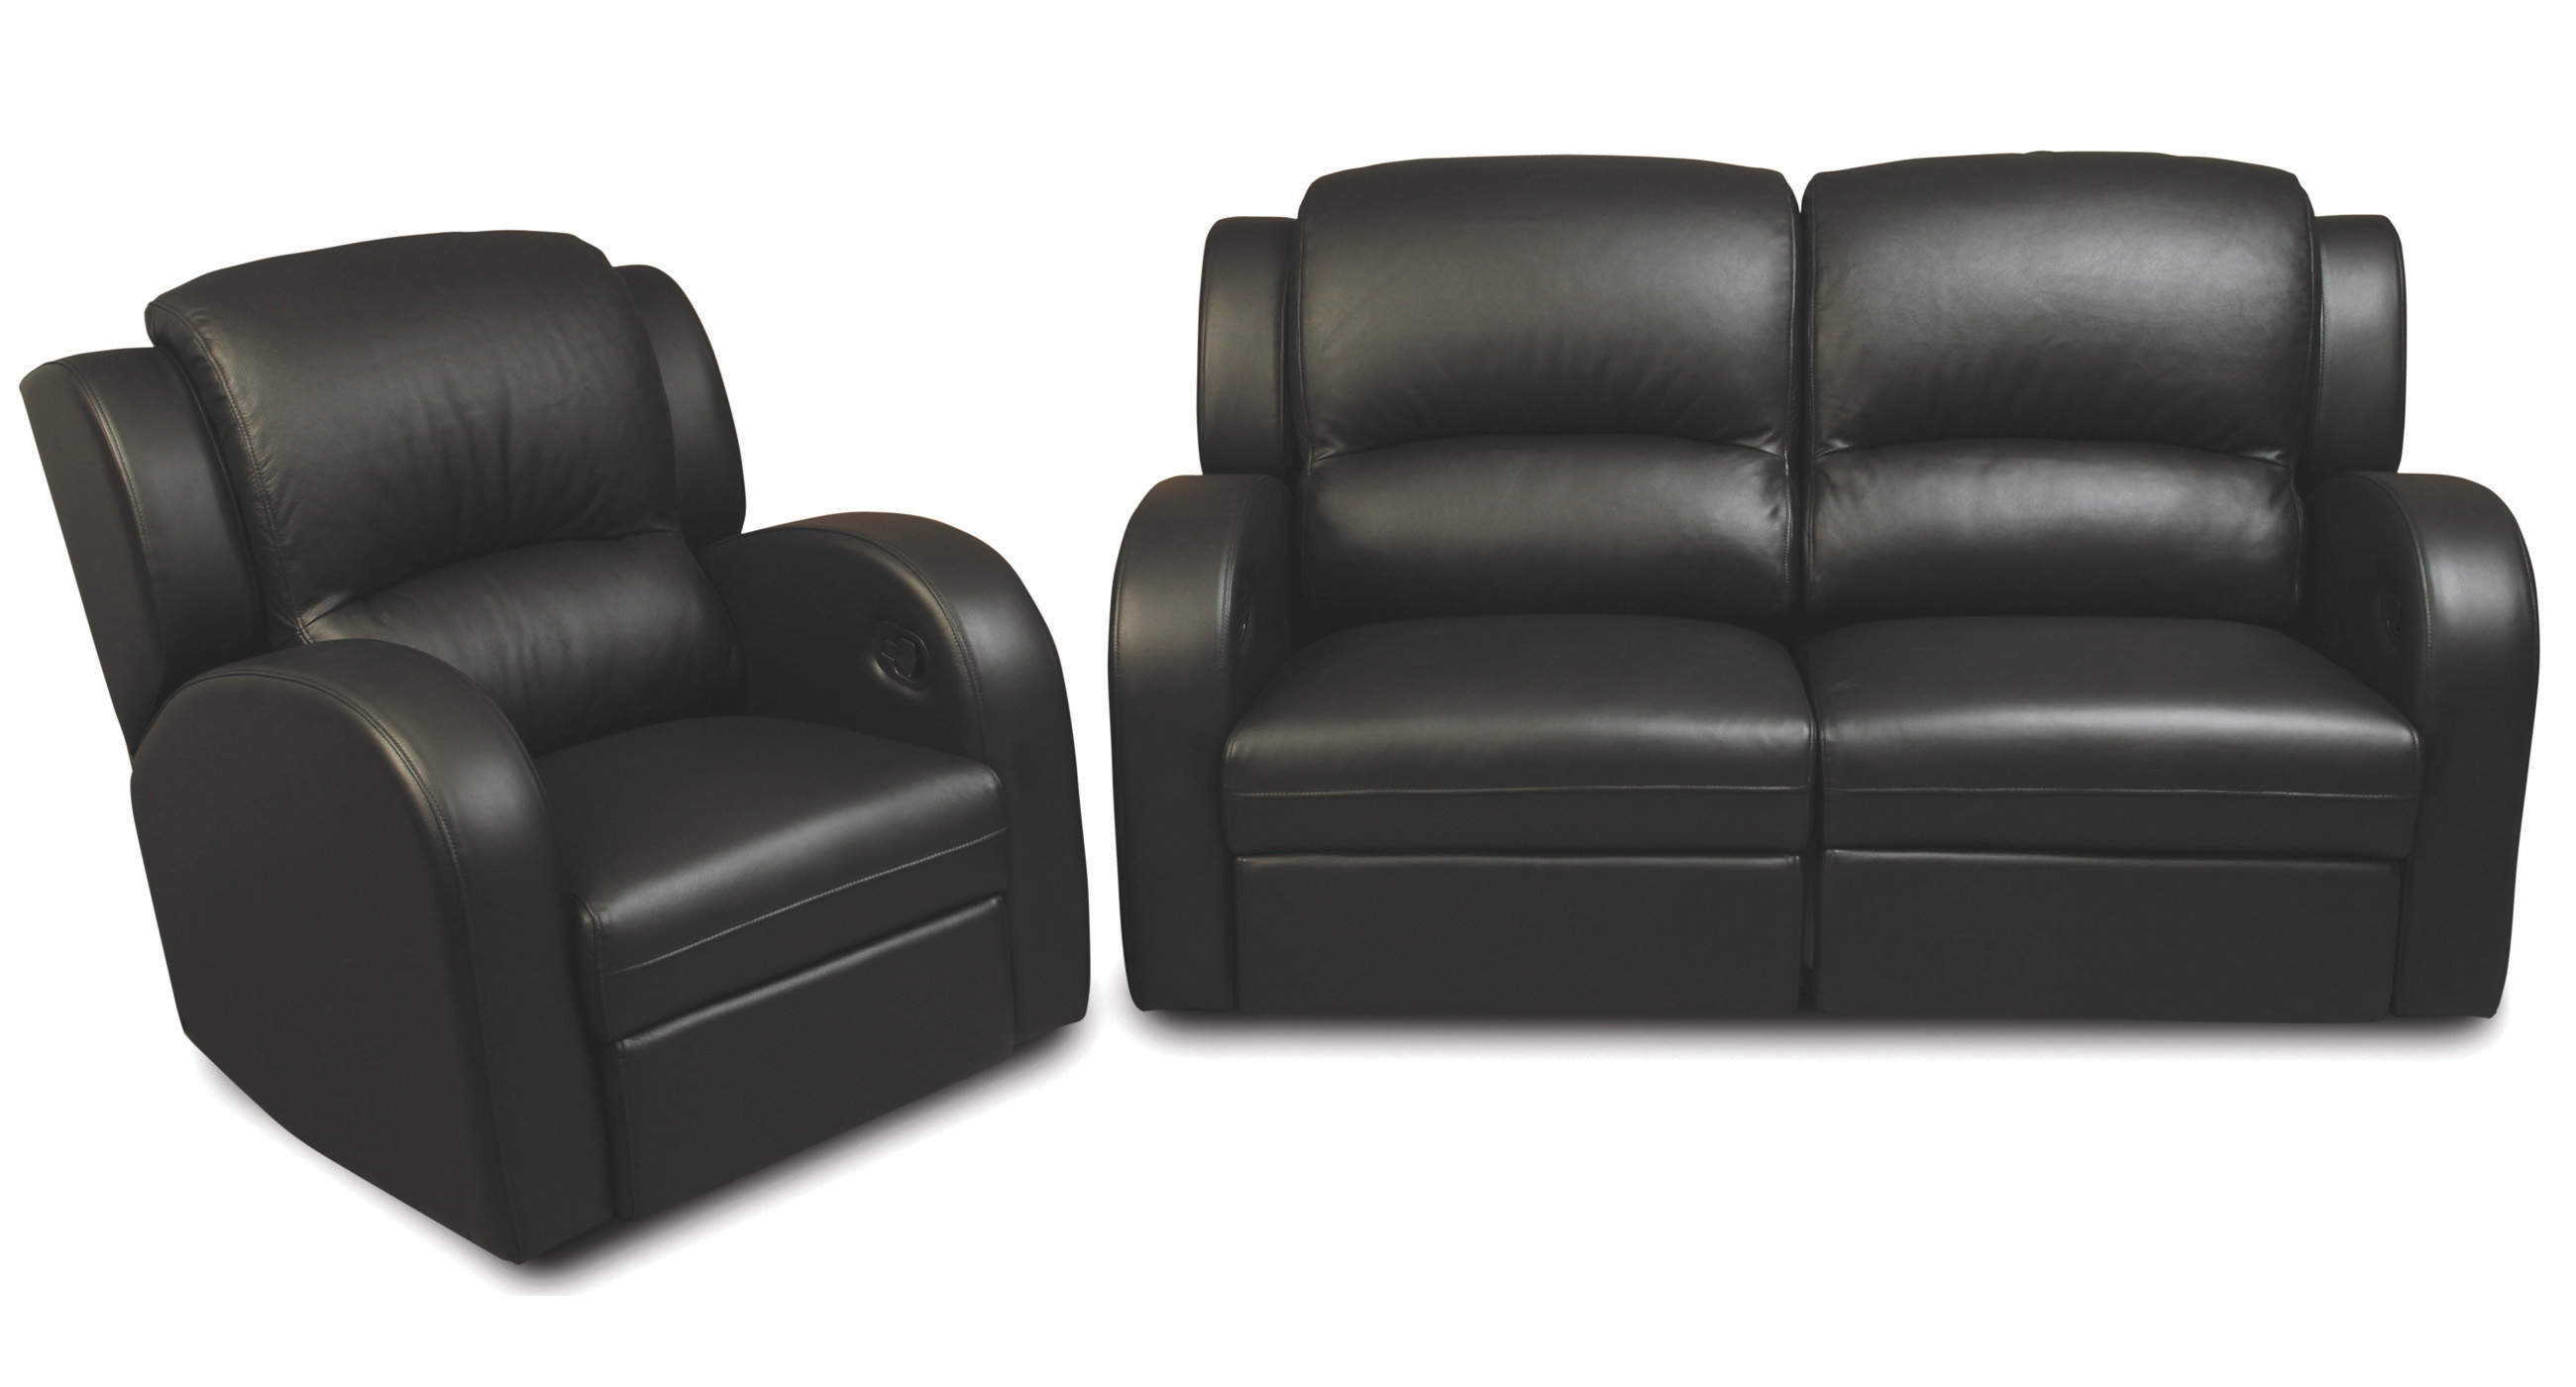 Deco Reclining Sofa and Chairs